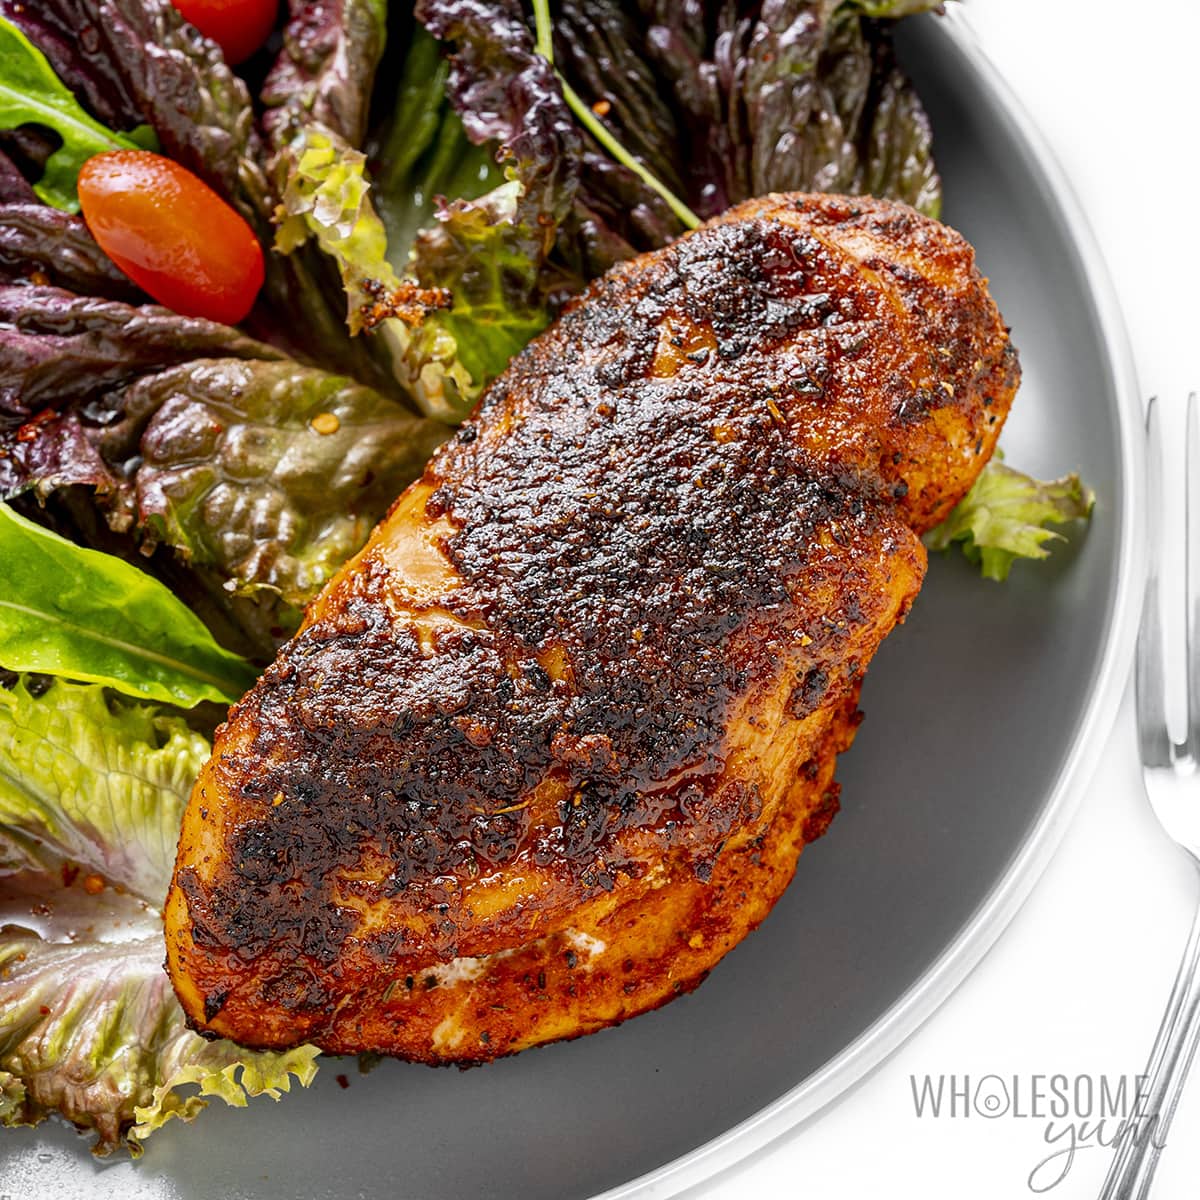 Blackened chicken on a plate with salad.